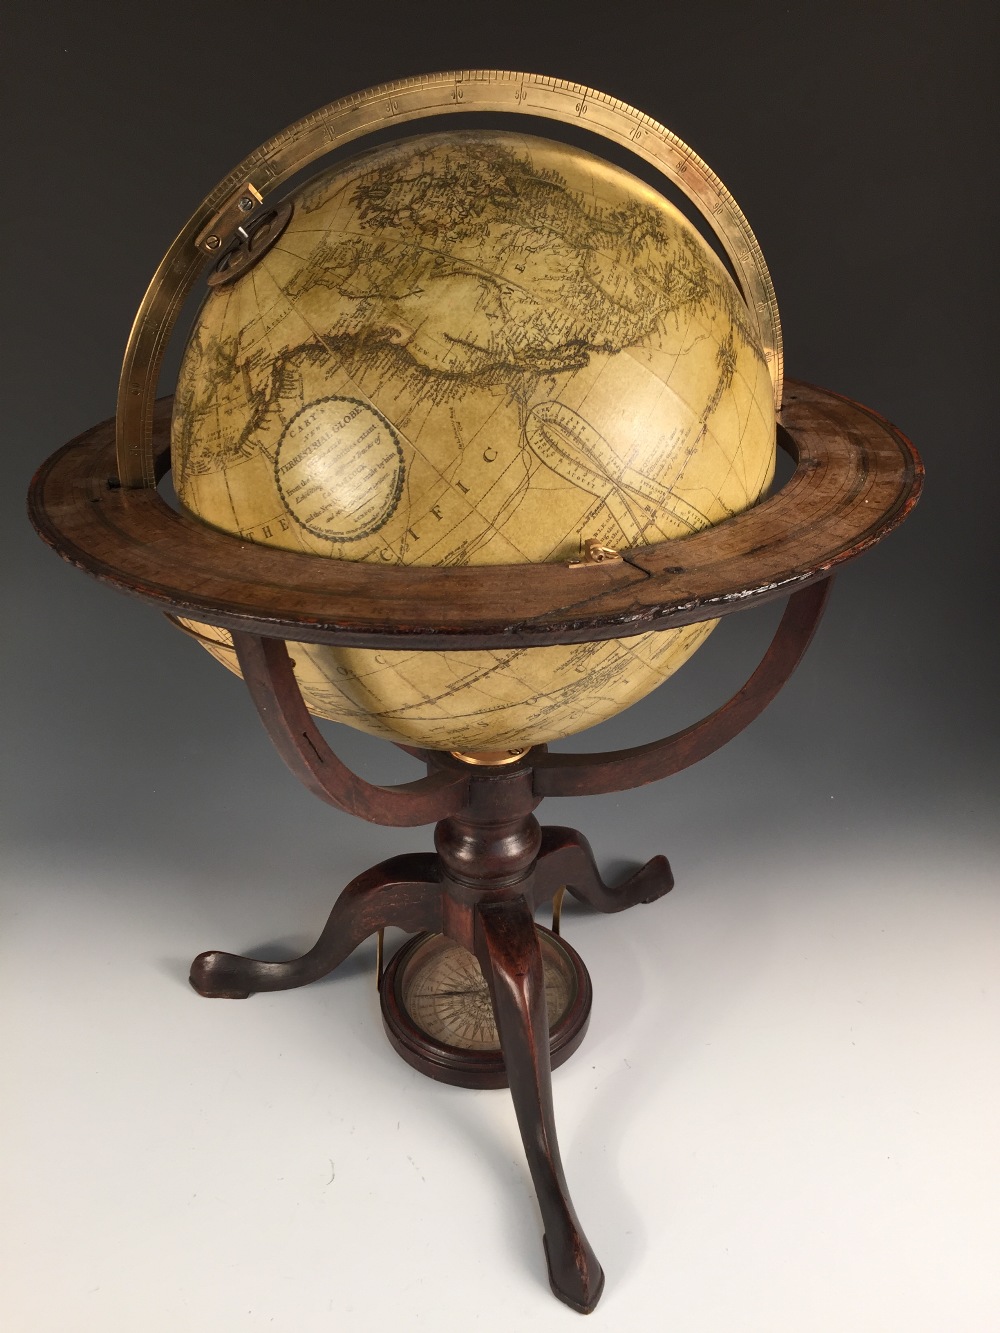 A Bastien terrestrial library globe, modern, on a Regency style mahogany stand with brass casters, - Image 2 of 5